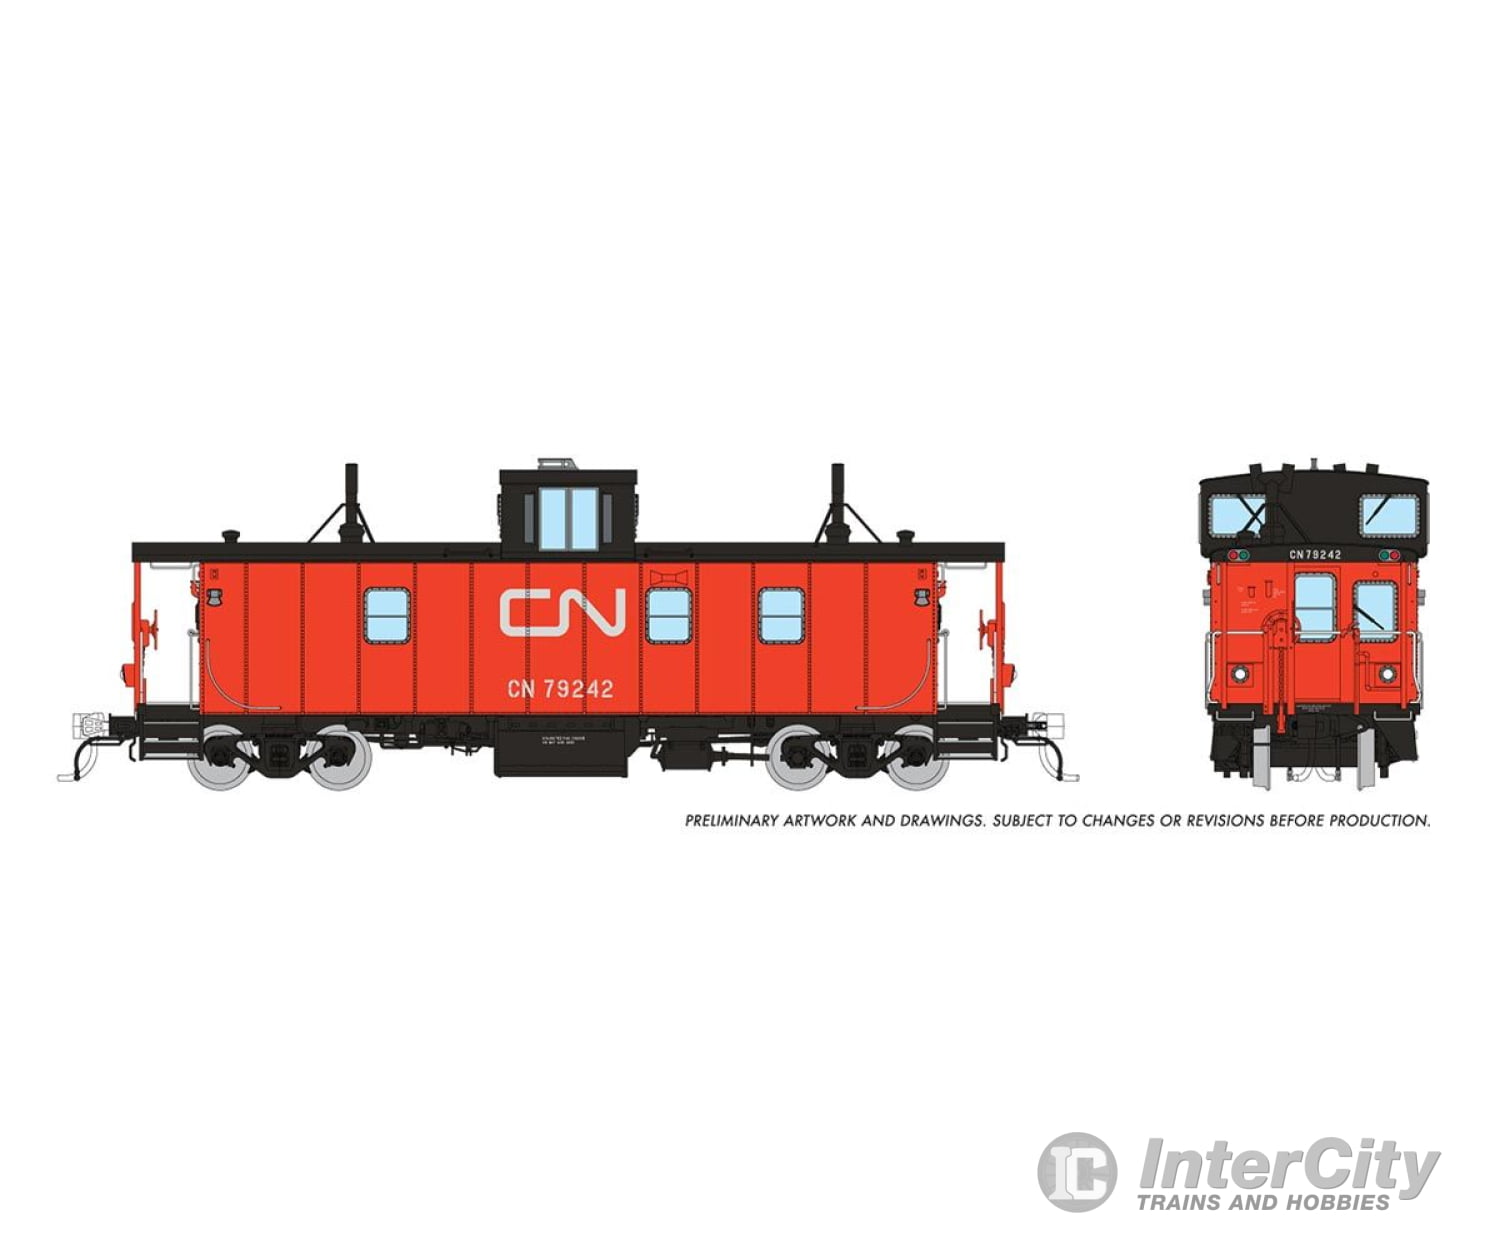 Rapido 166012 Ho Cn H - S Caboose: - Late W/ Black Steps: #79242 Stencil Lettering Freight Cars